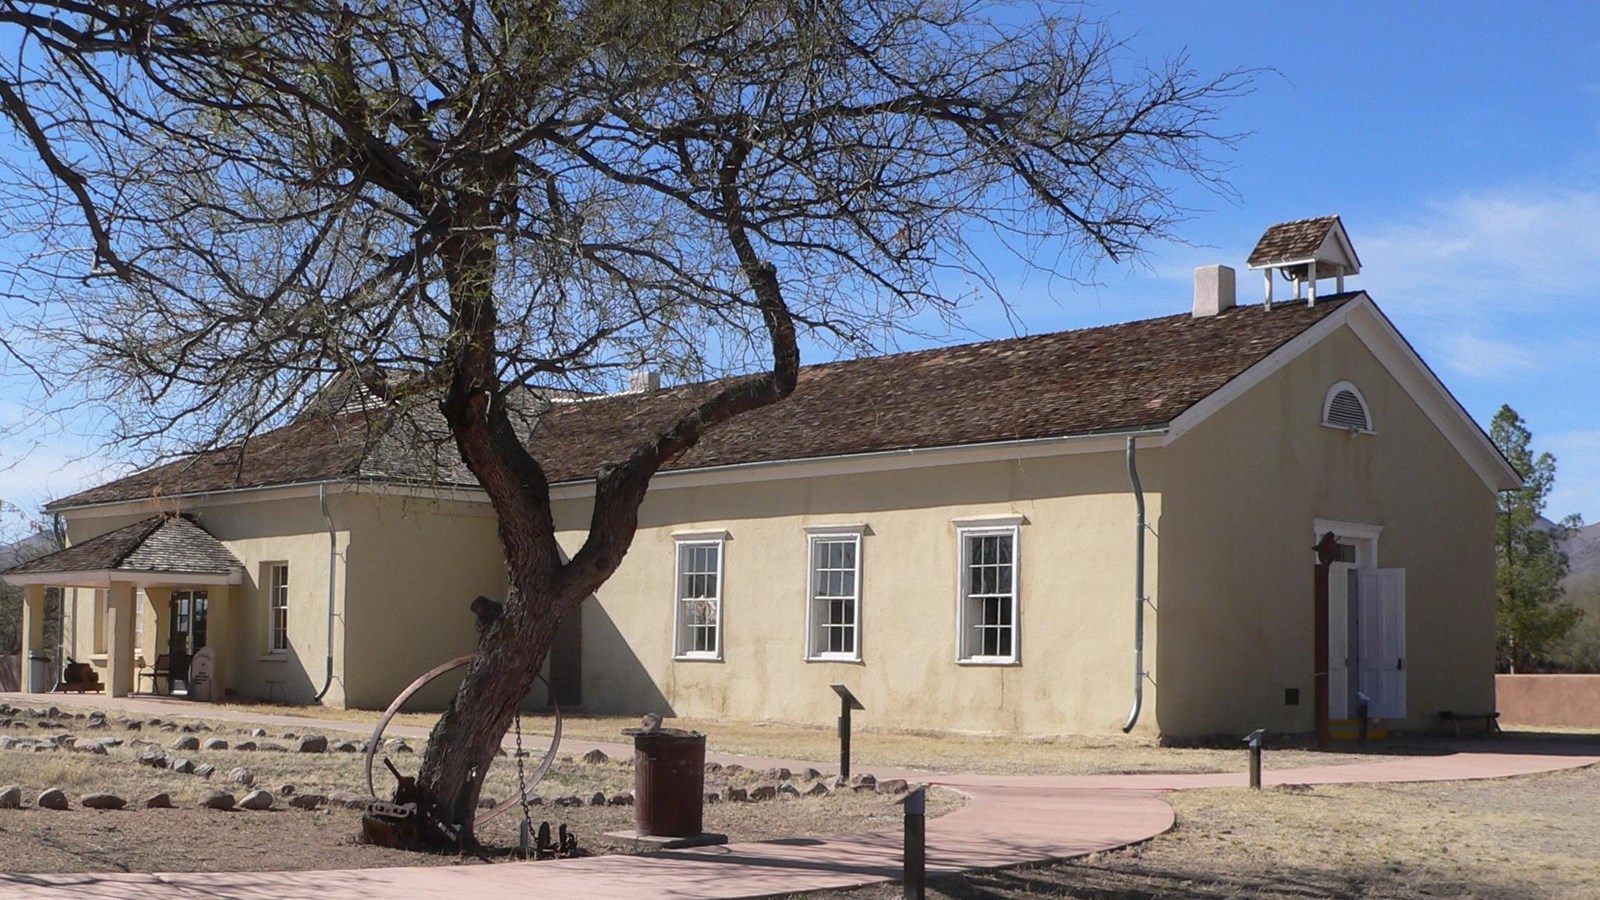 An old wagon frame in the foreground, with a historic adobe schoolhouse in the background